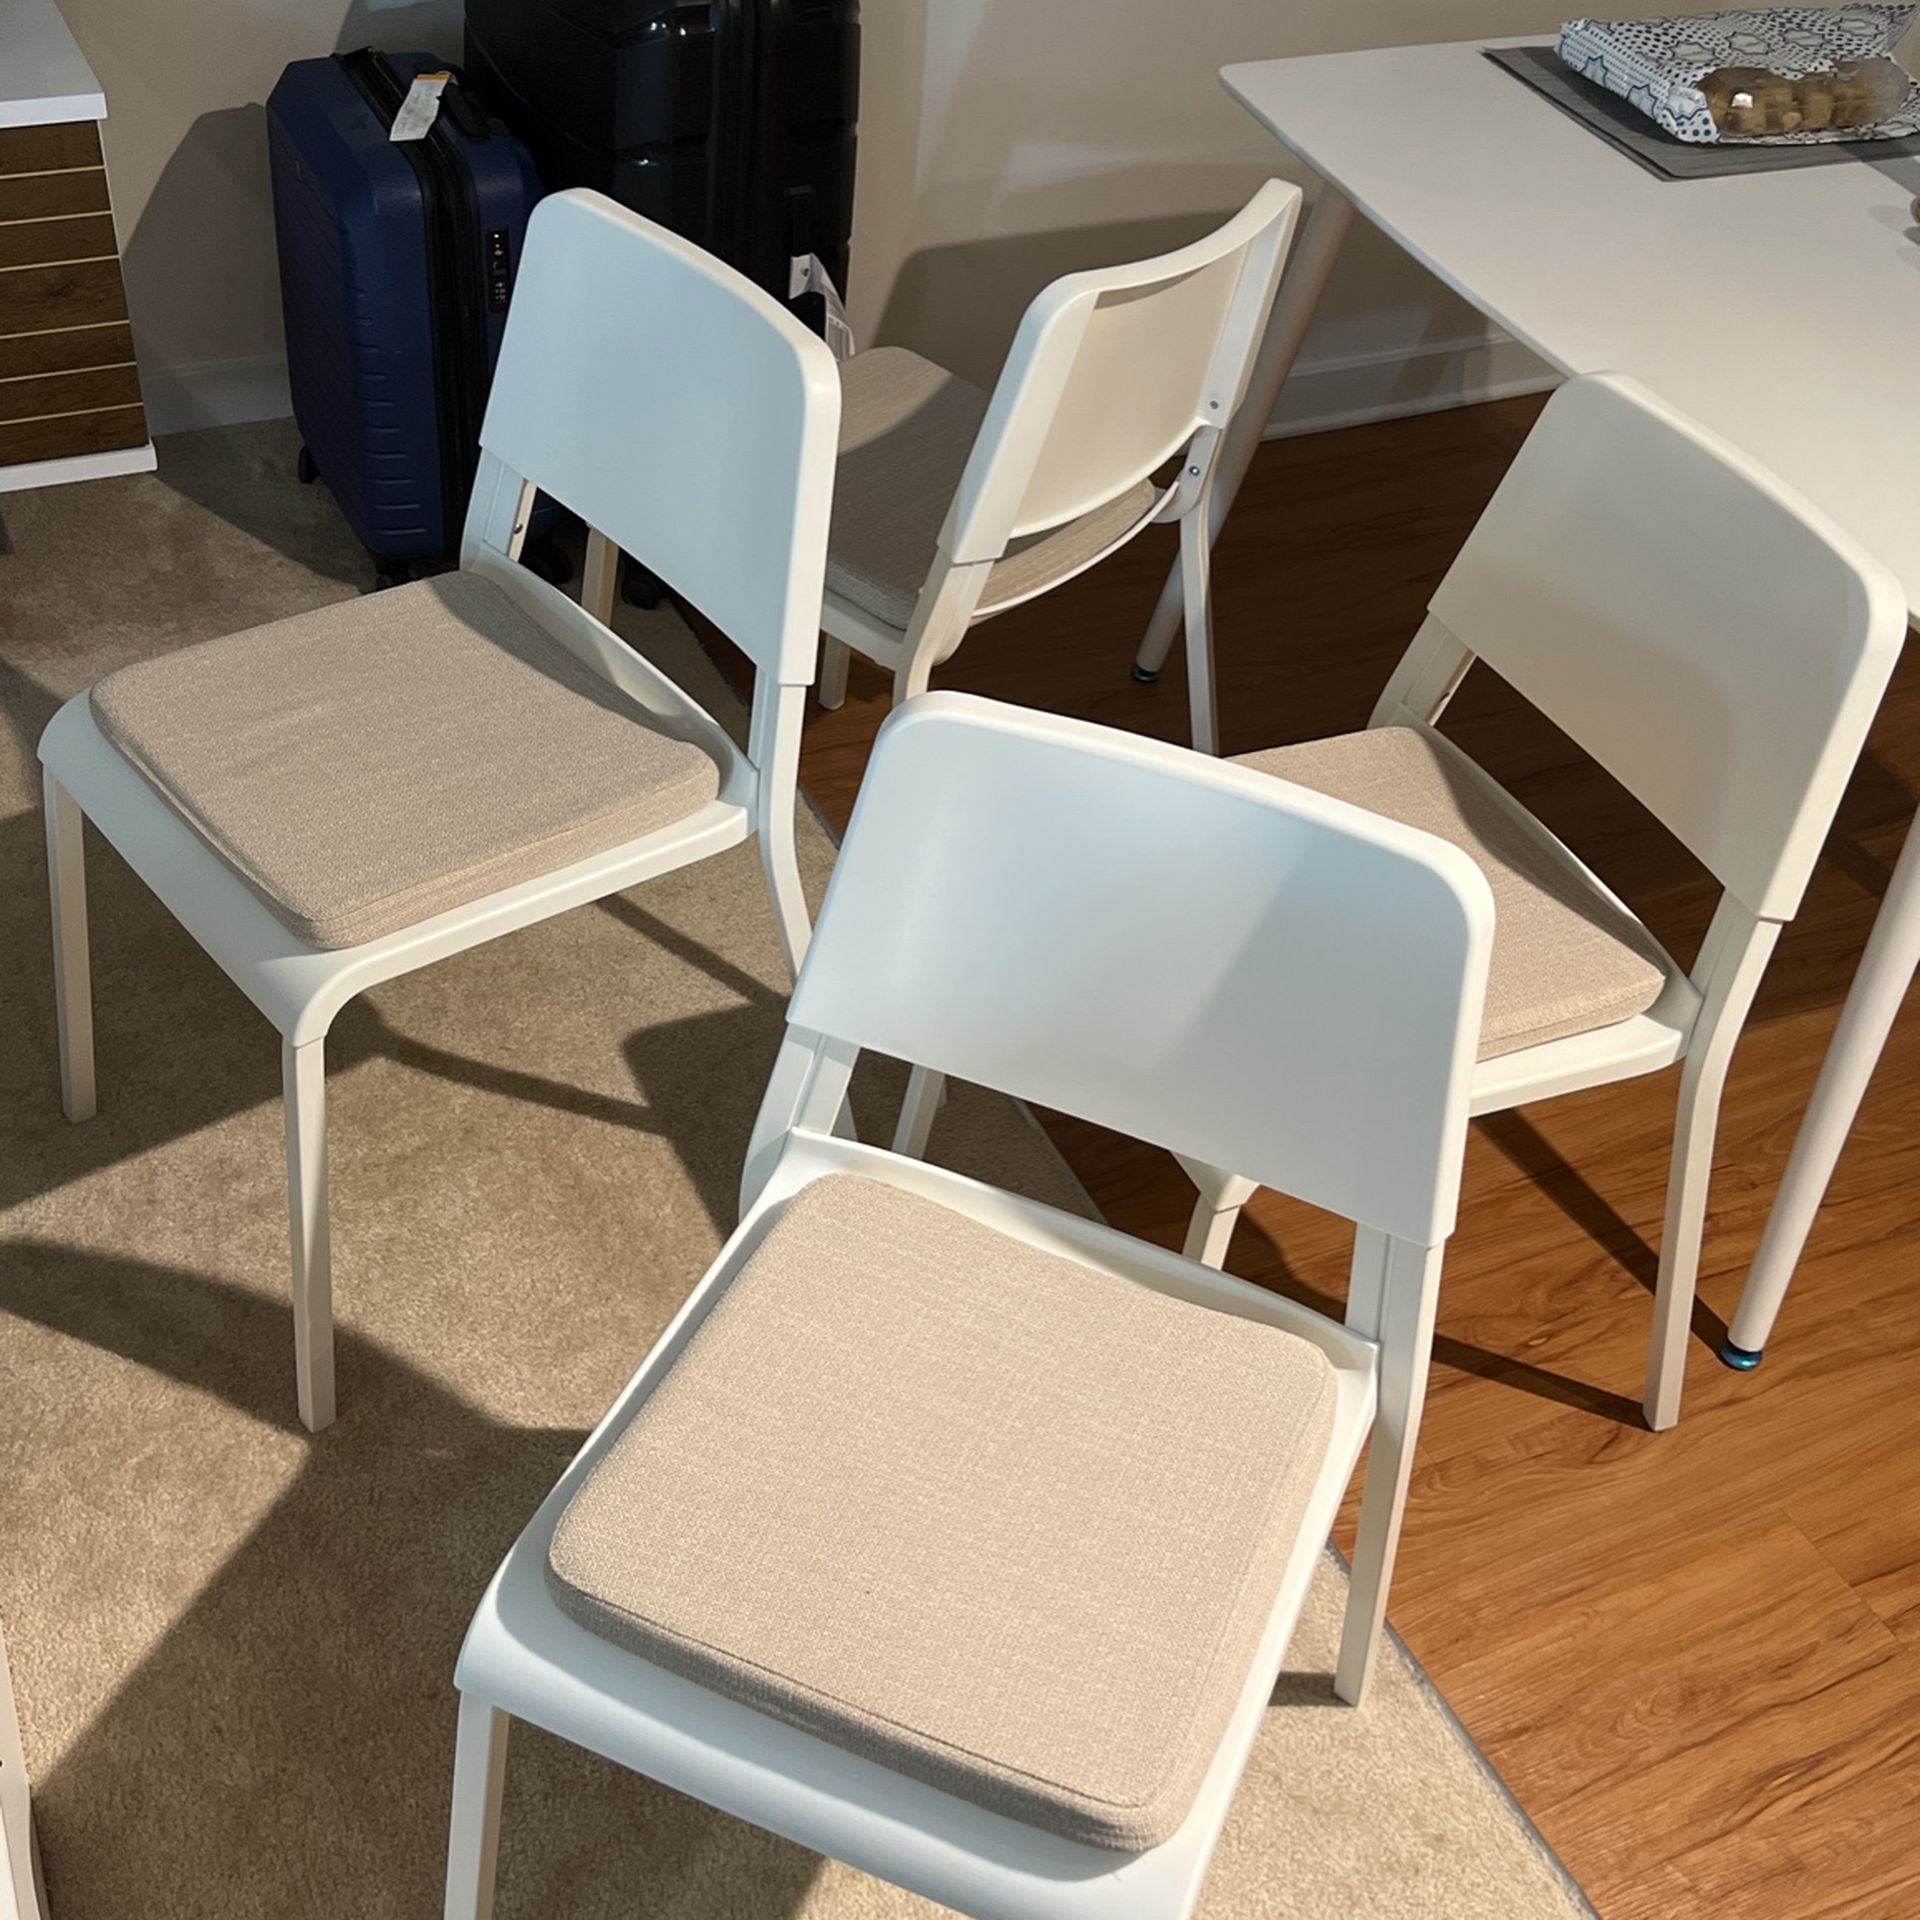 4x Chairs, white, IKEA TEODORES + Chair Pads, Beige